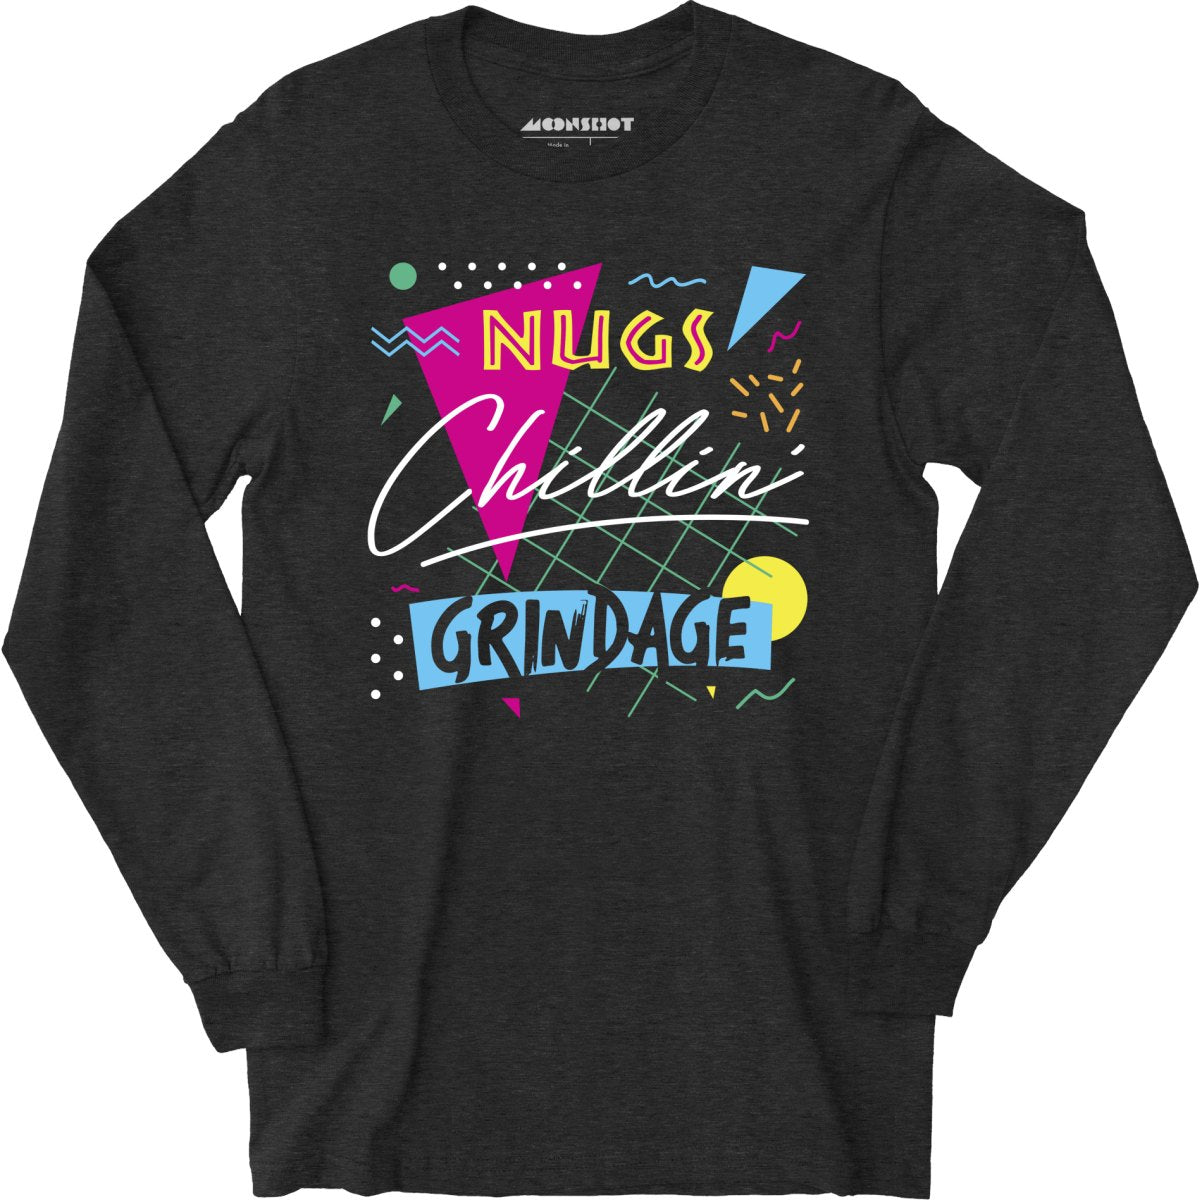 Nugs, Chillin', and Grindage - Long Sleeve T-Shirt